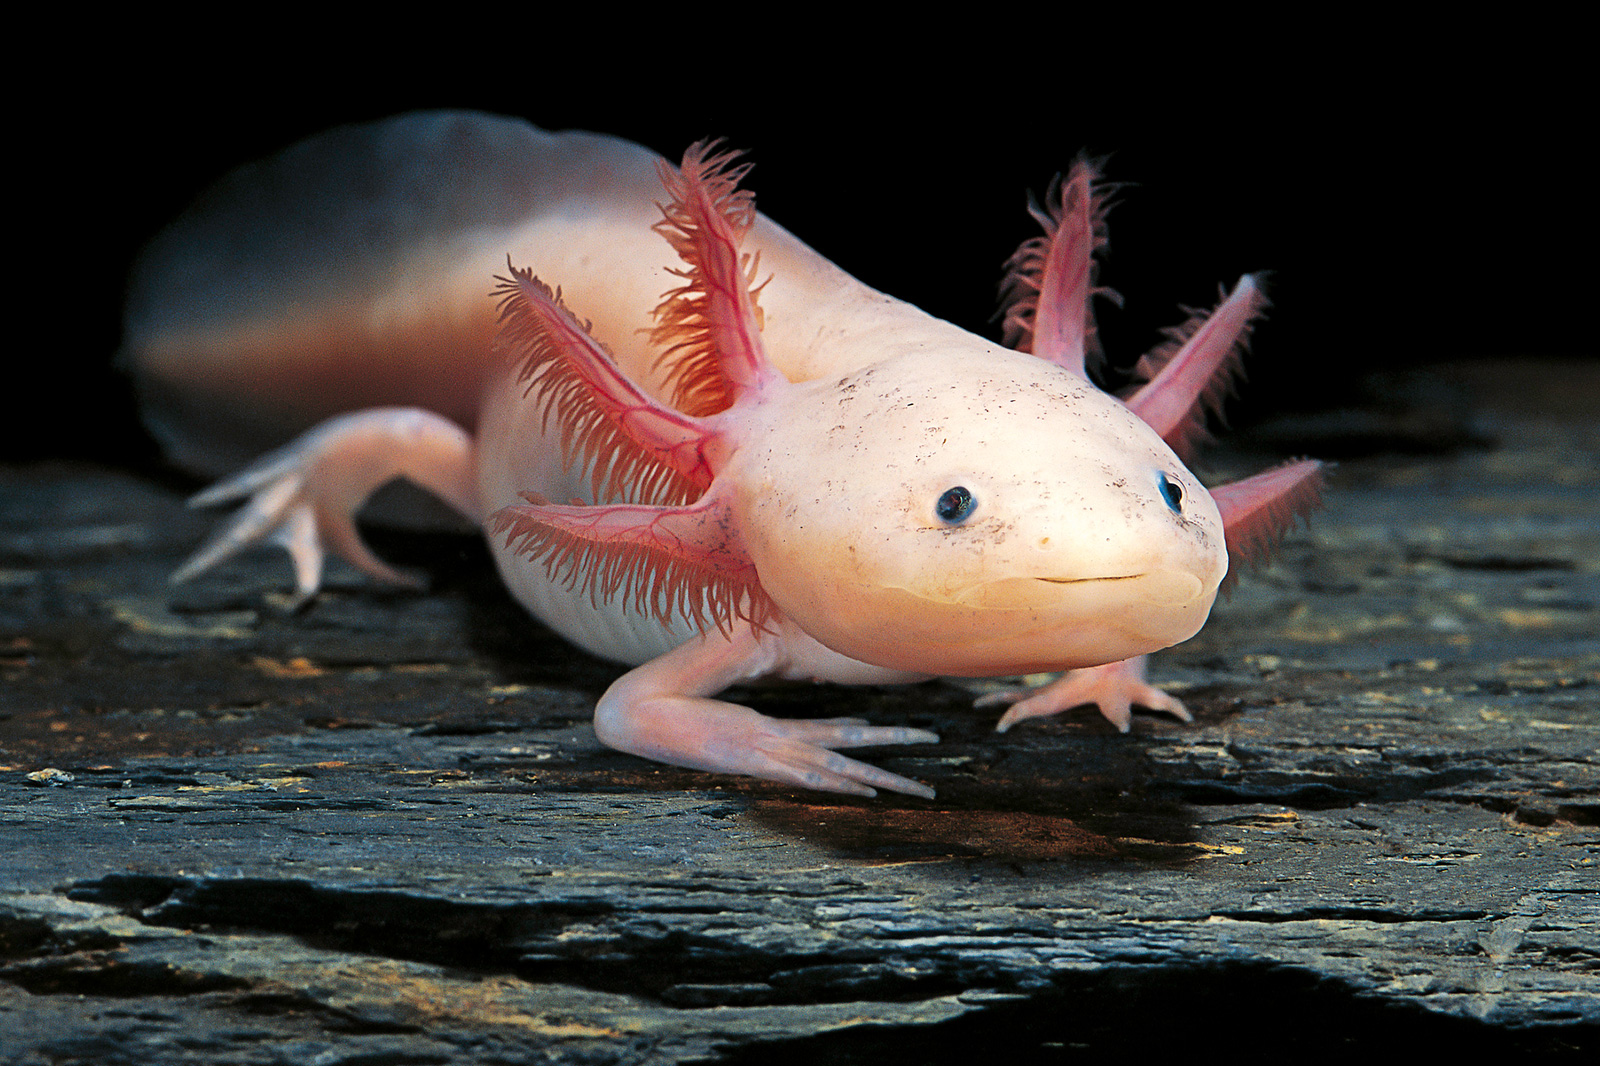 This General Knowledge Quiz Is Not That Hard, So to Impress Me, You’ll Need to Score 16/20 Axolotl